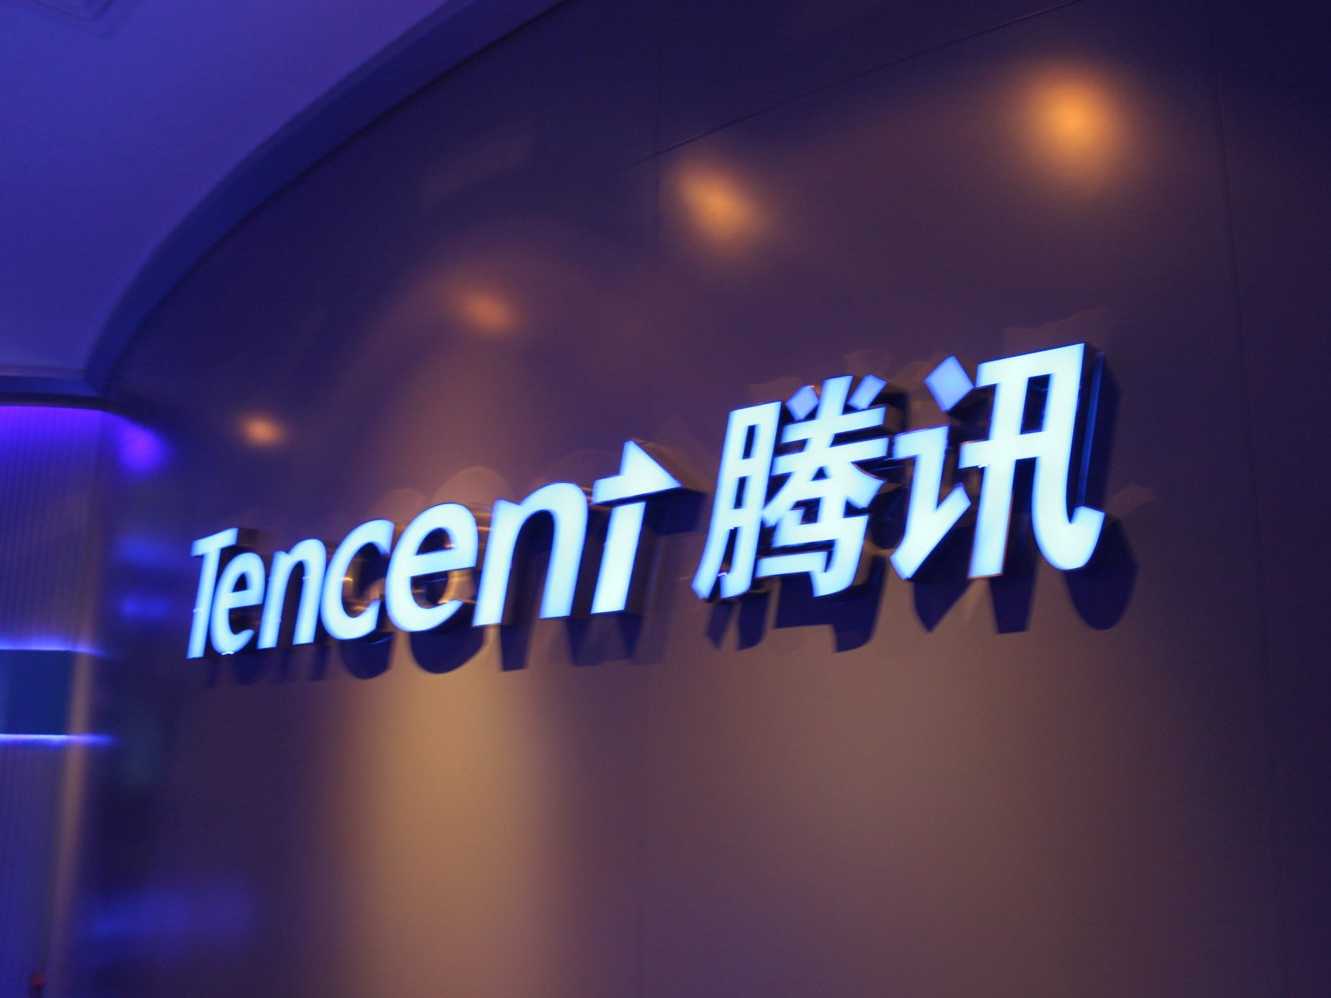 sony-and-tencent-have-struck-a-music-distribution-deal-for-china.jpg